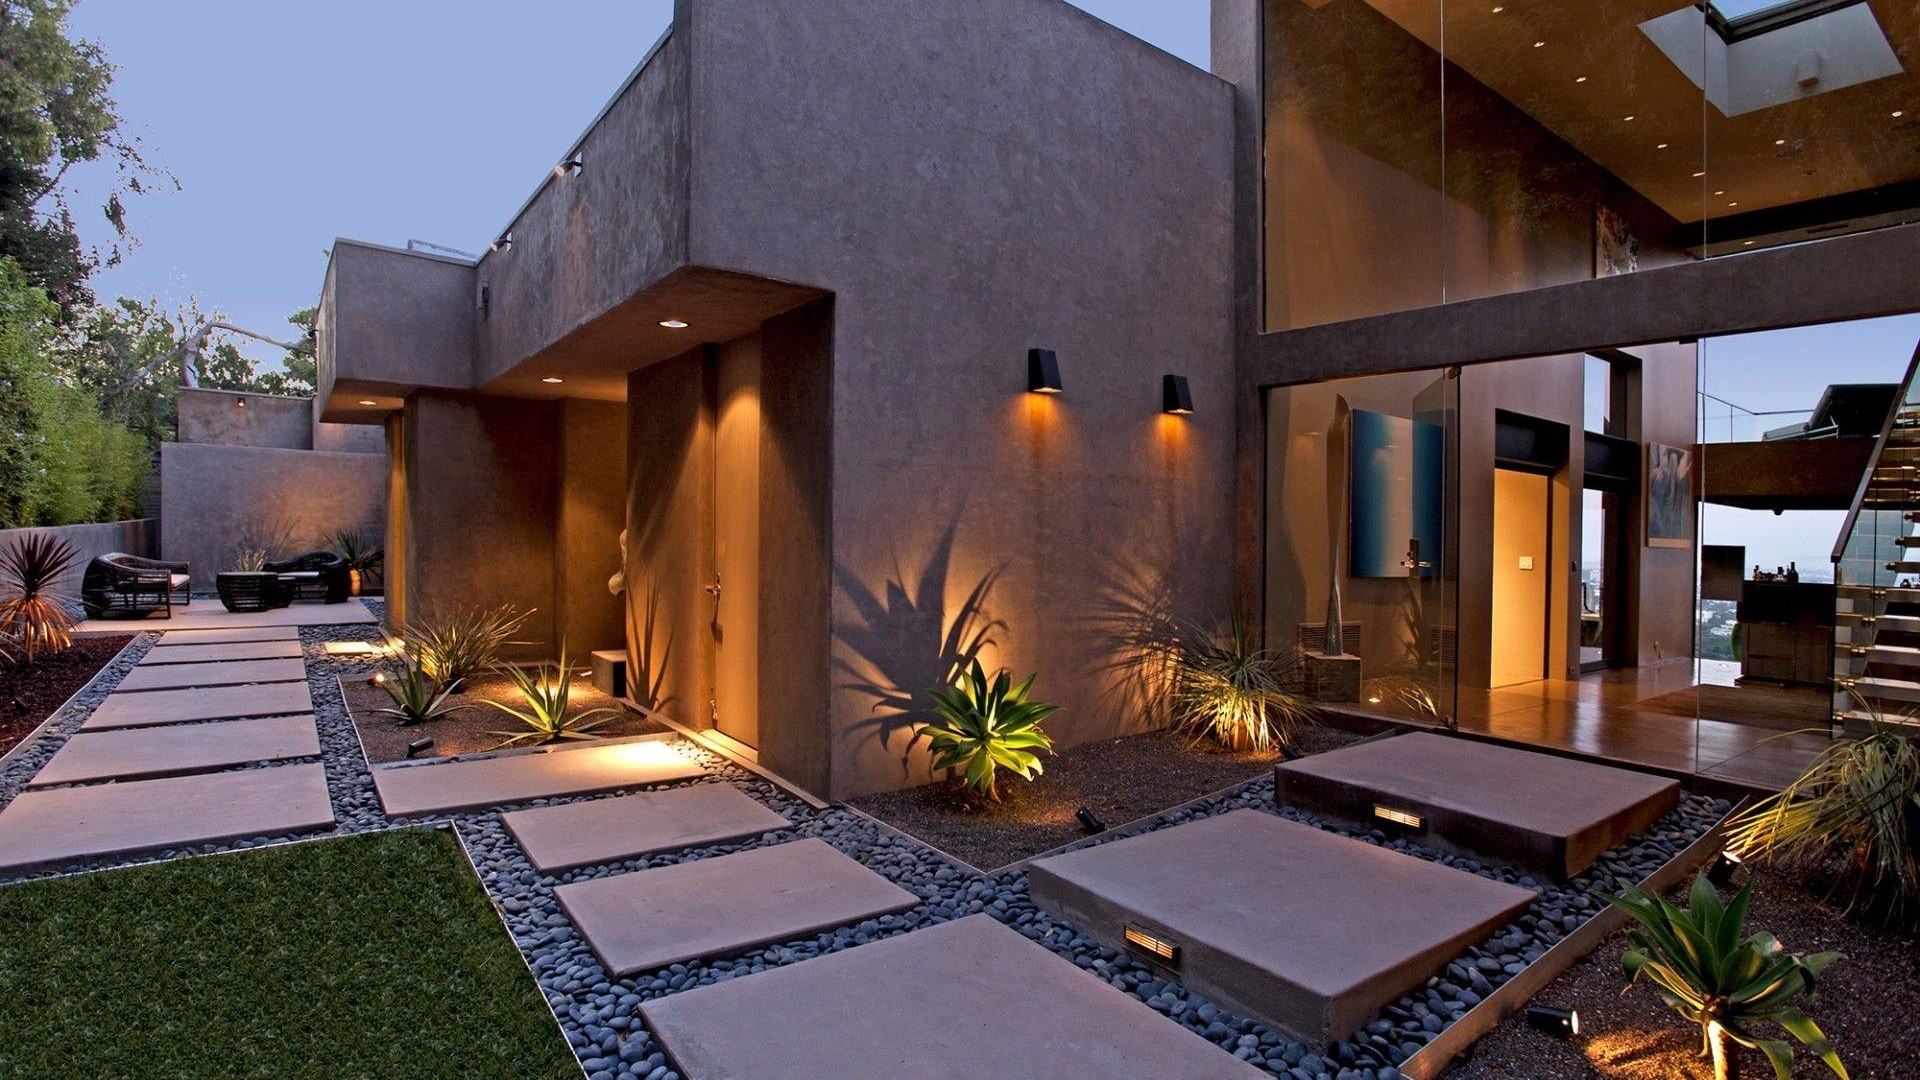 1920x1080_nice-design-outside-the-house